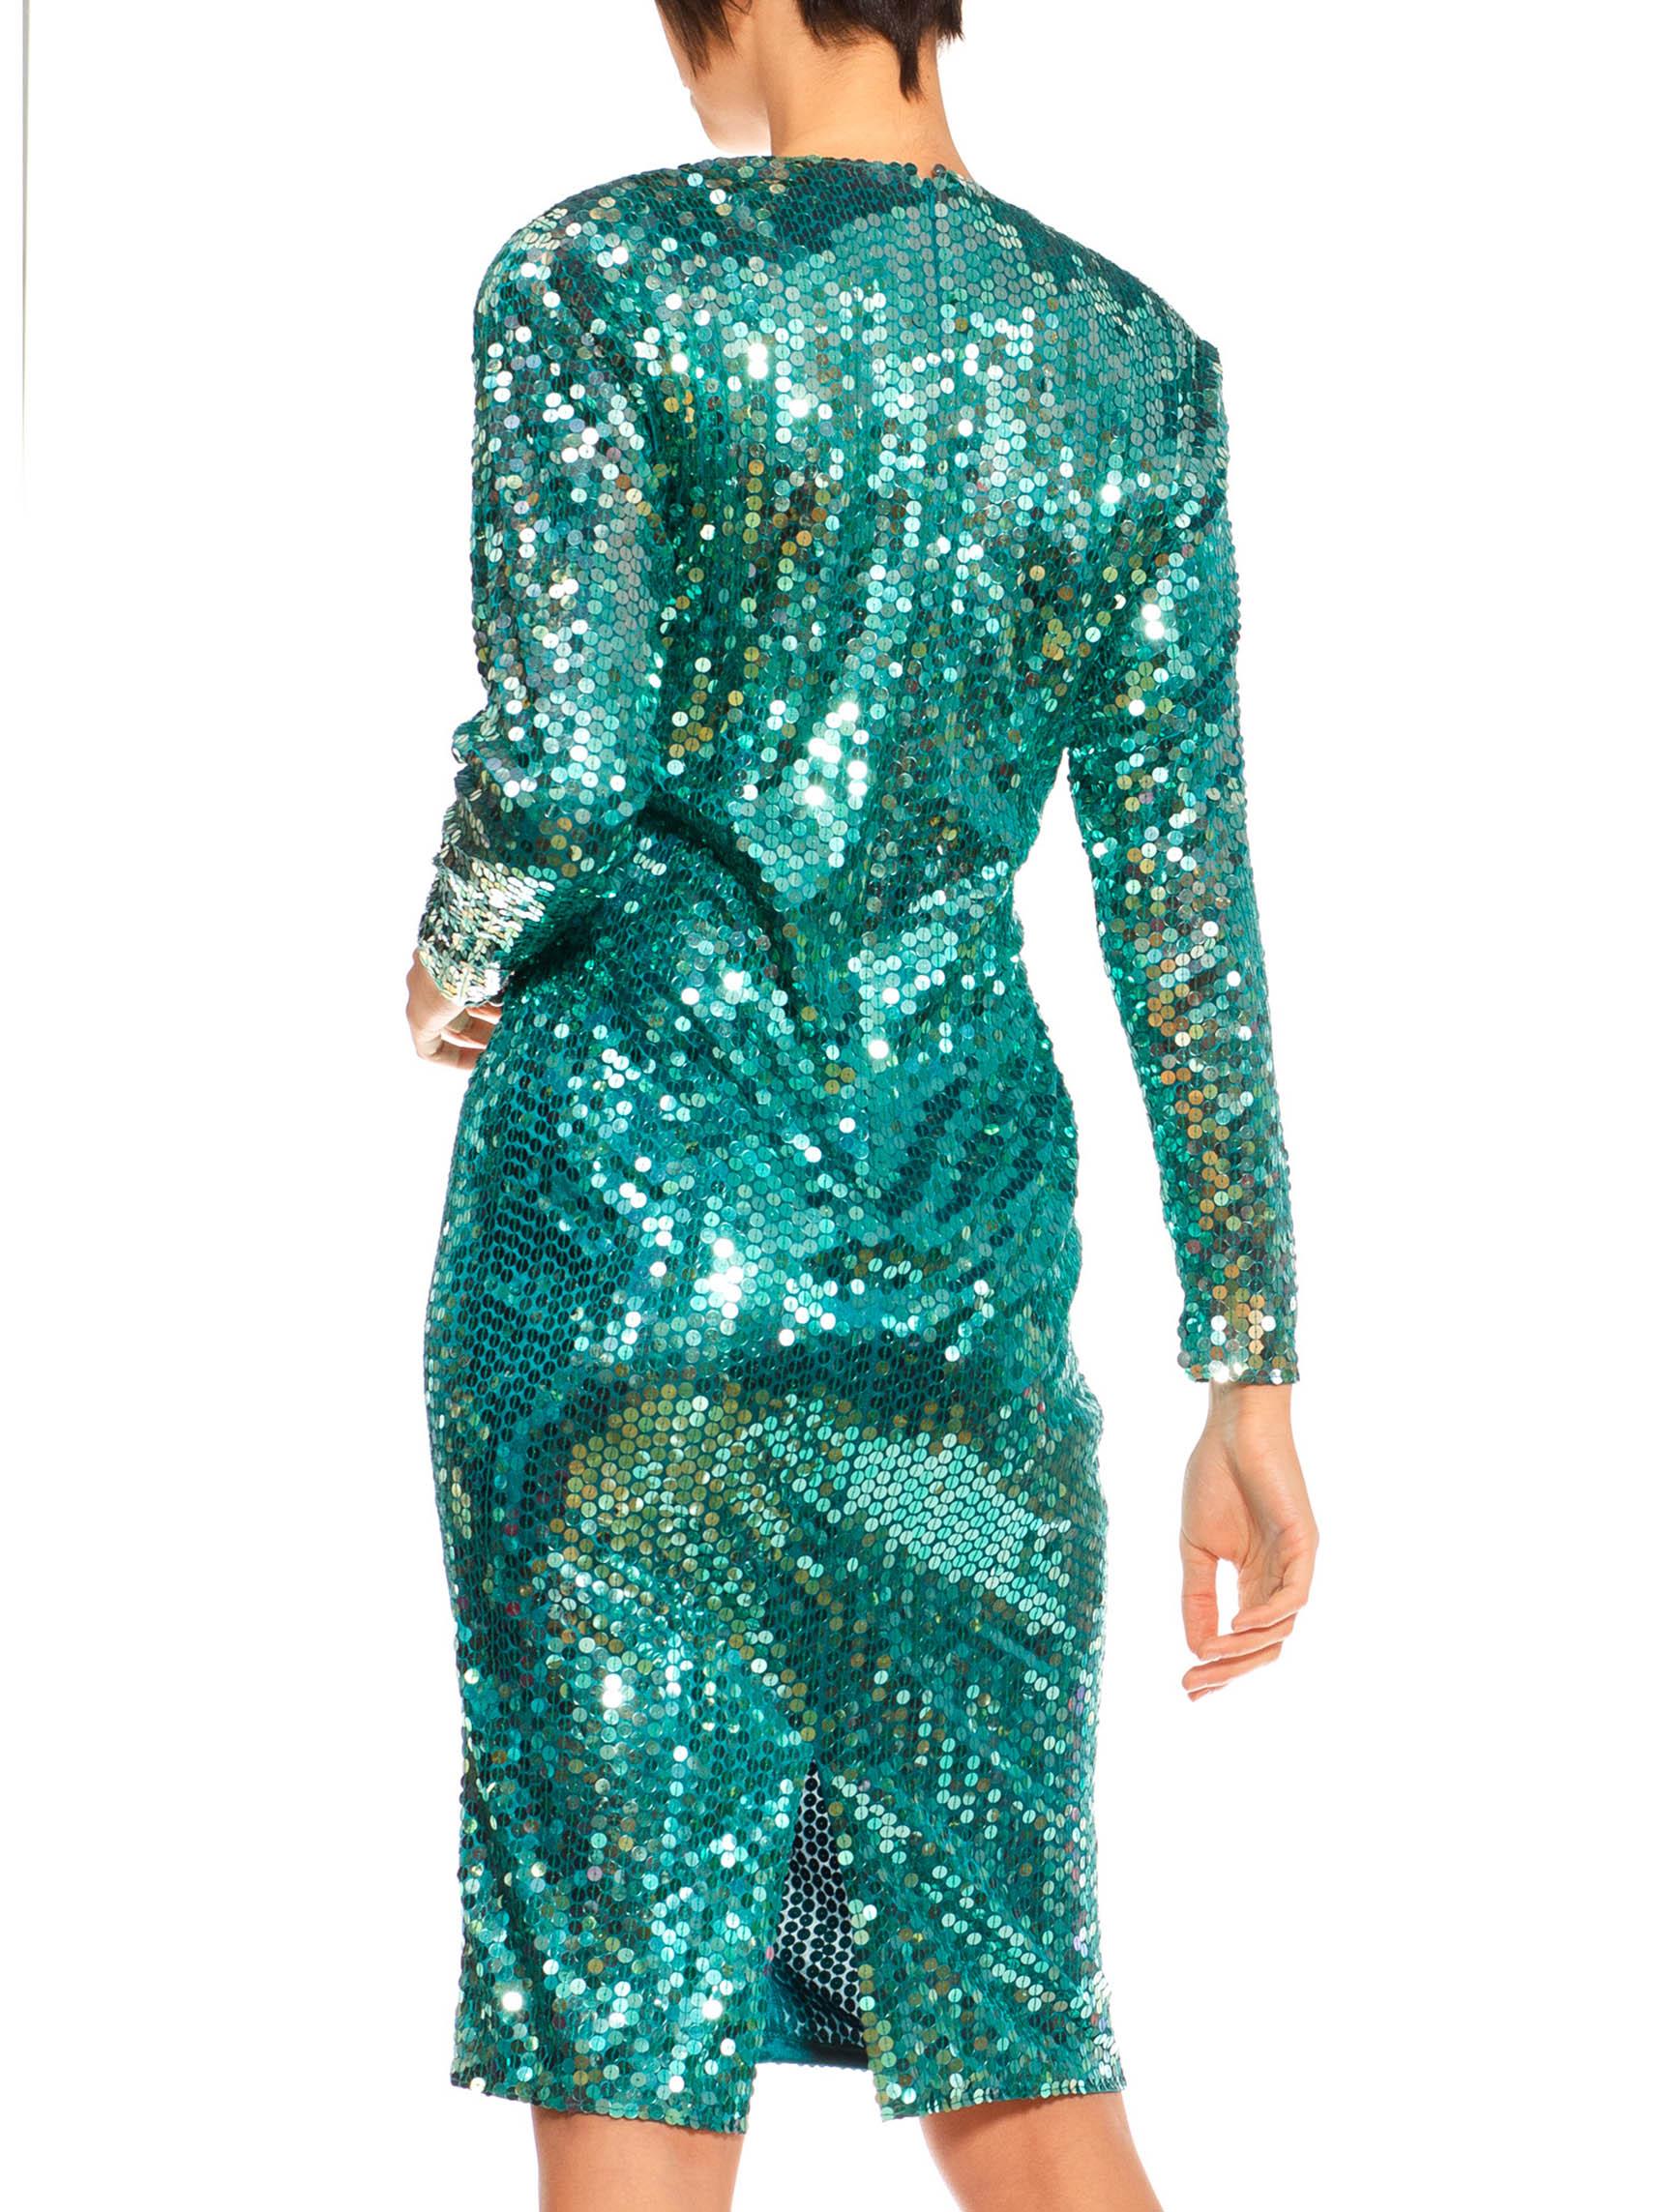 1980S Teal Sequined Poly/Viscose Jersey Low Cut & Long Sleeved Cocktail Dress For Sale 3